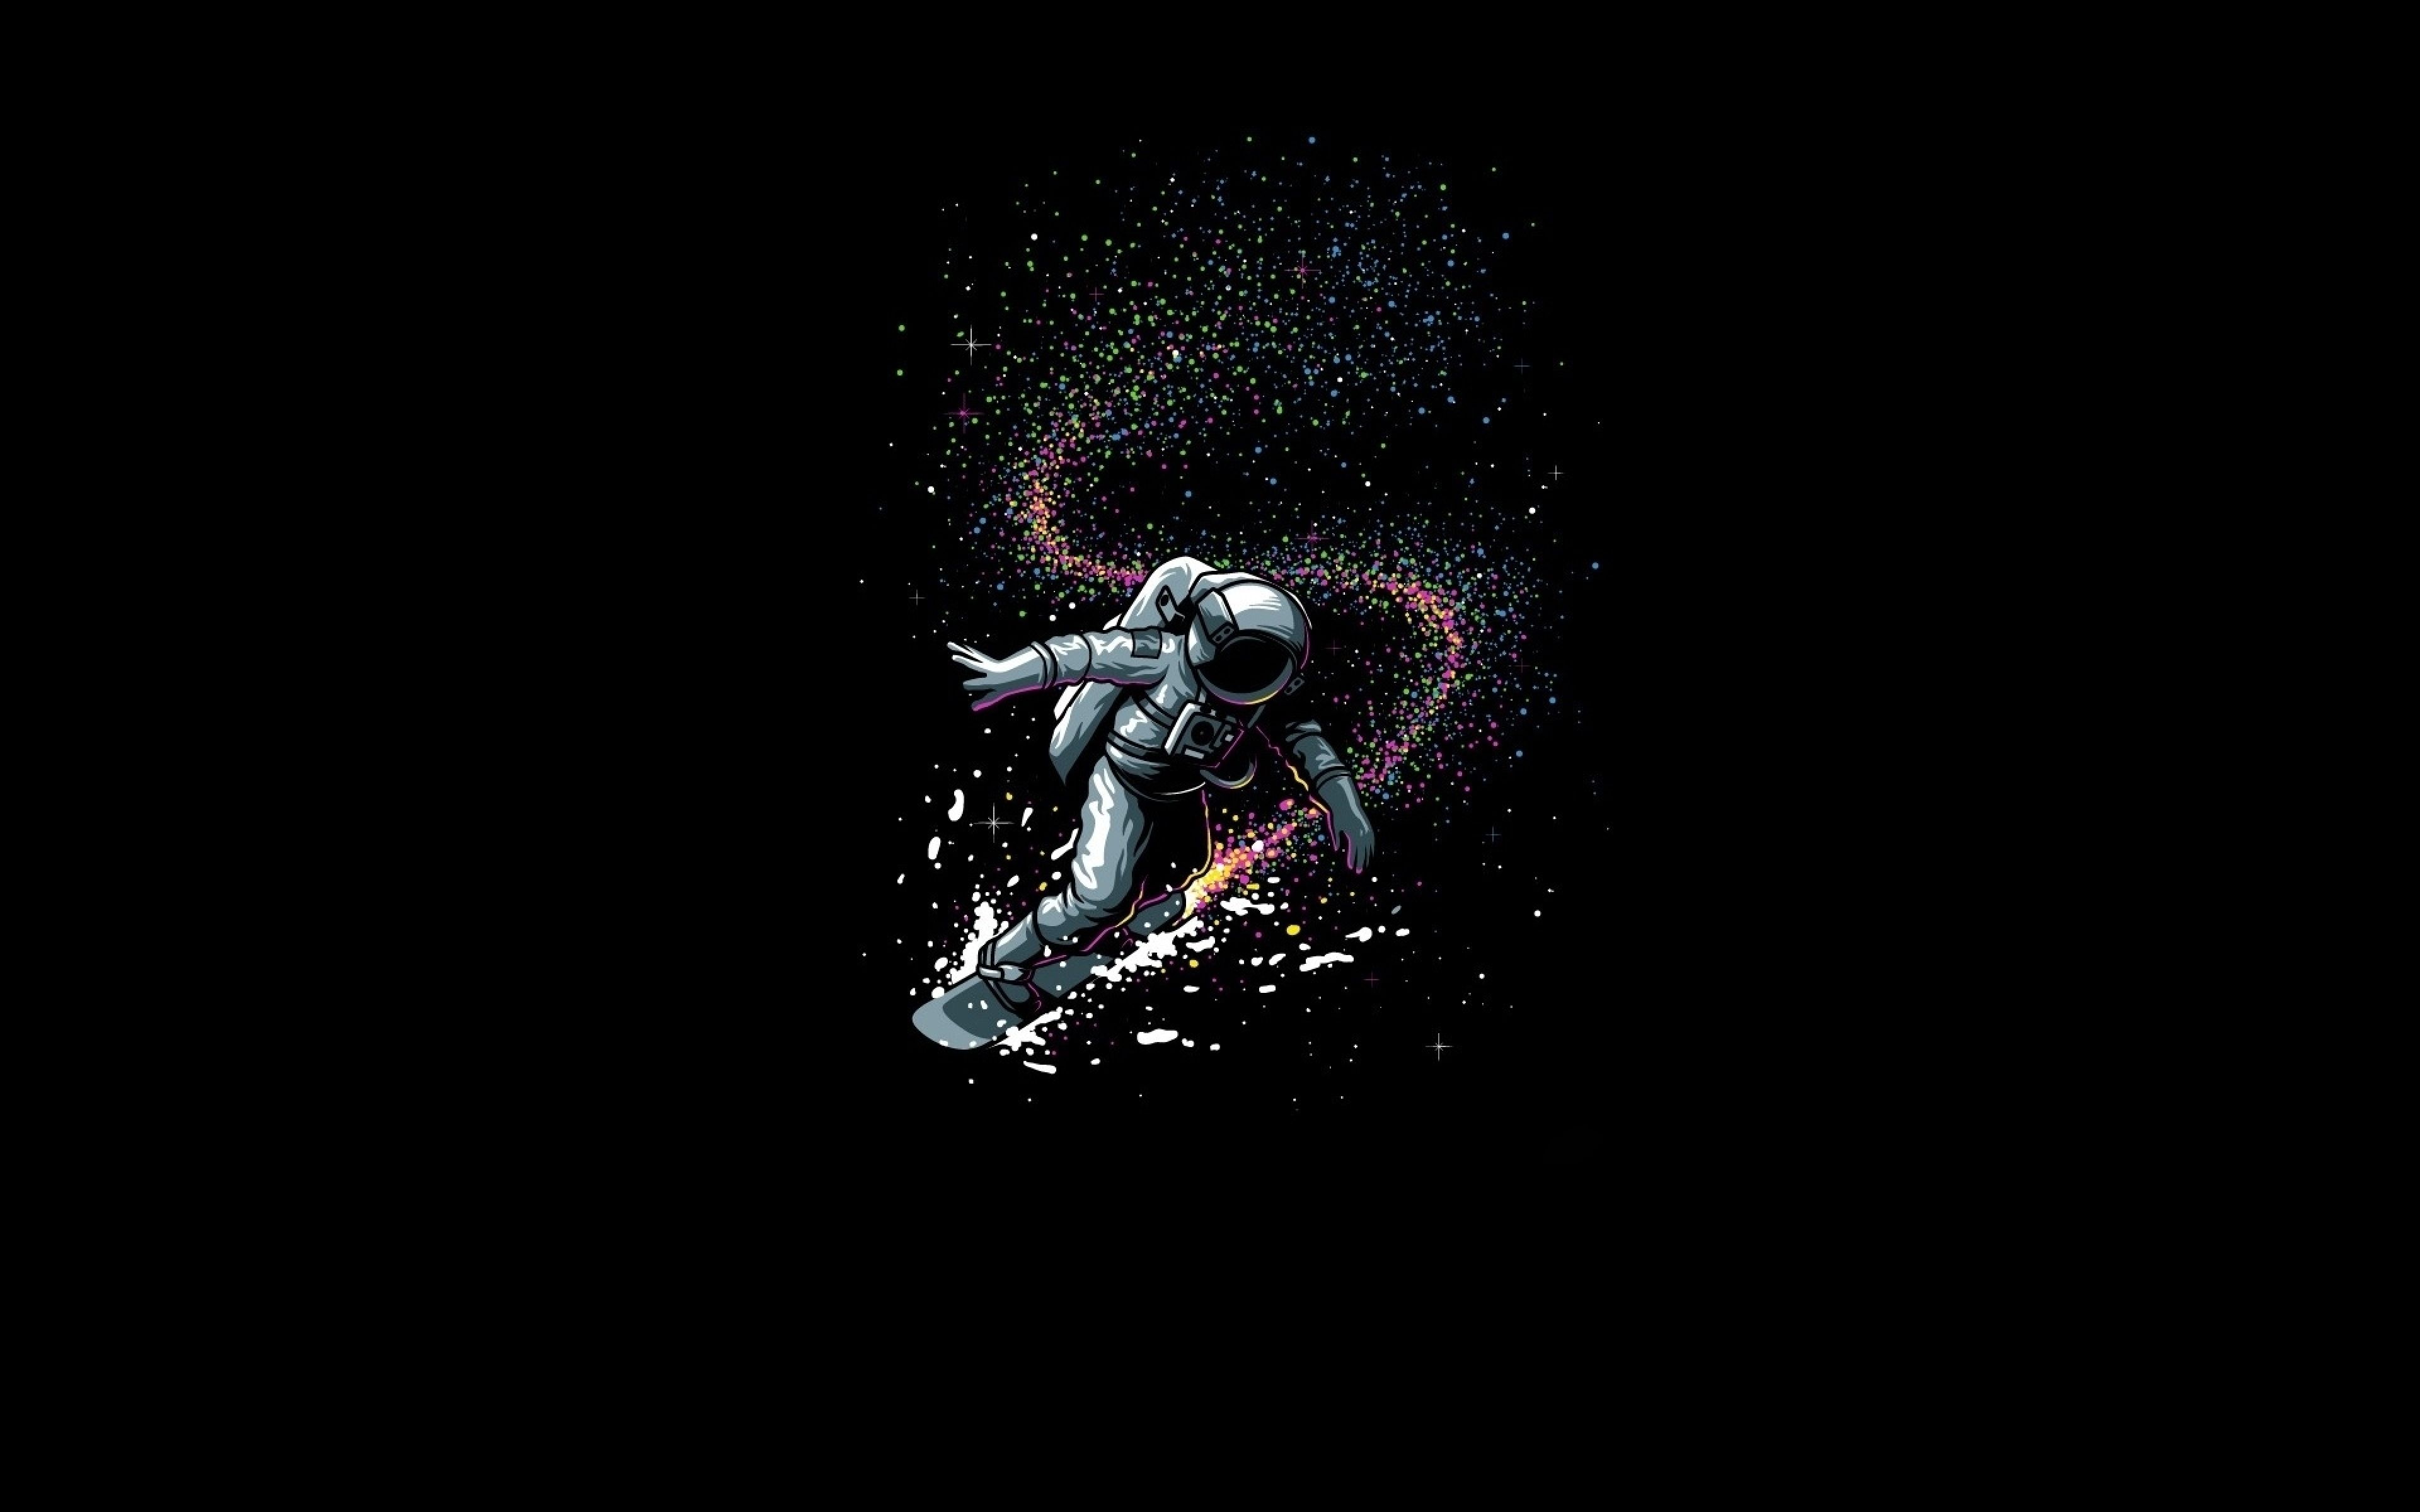 Surfing Astronaut Space iPhone Wallpaper